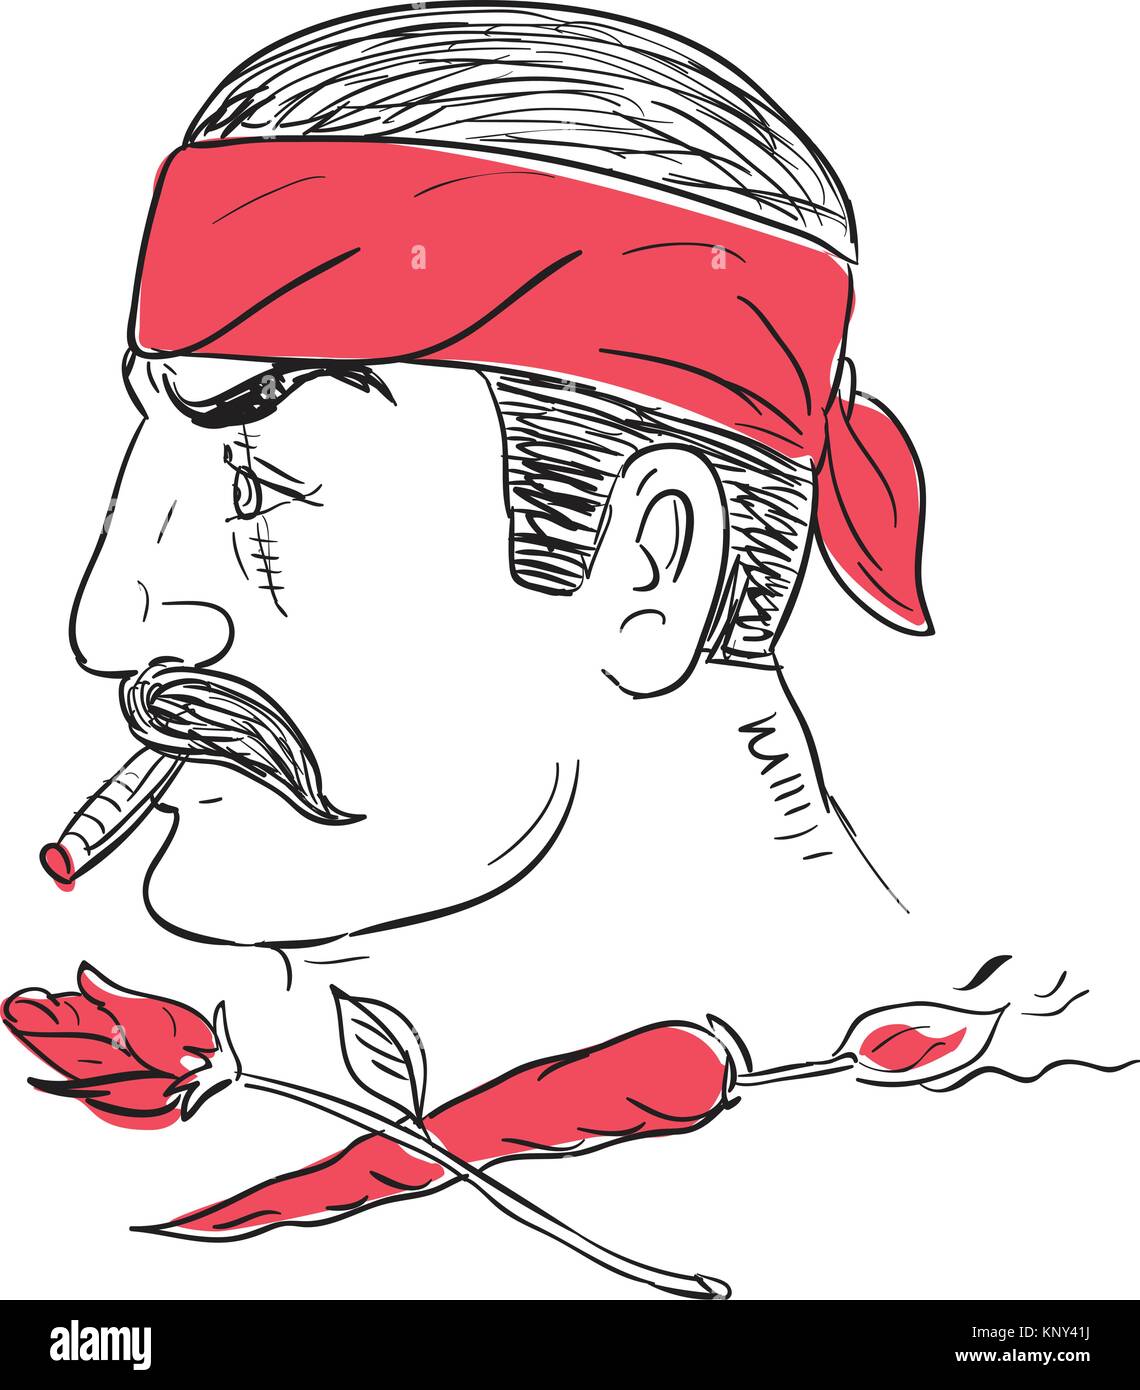 Drawing sketch style illustration of a Mexican guy smoking cigar wearing bandana with scar of face with crossed hot chili with burning fuse and rose f Stock Vector